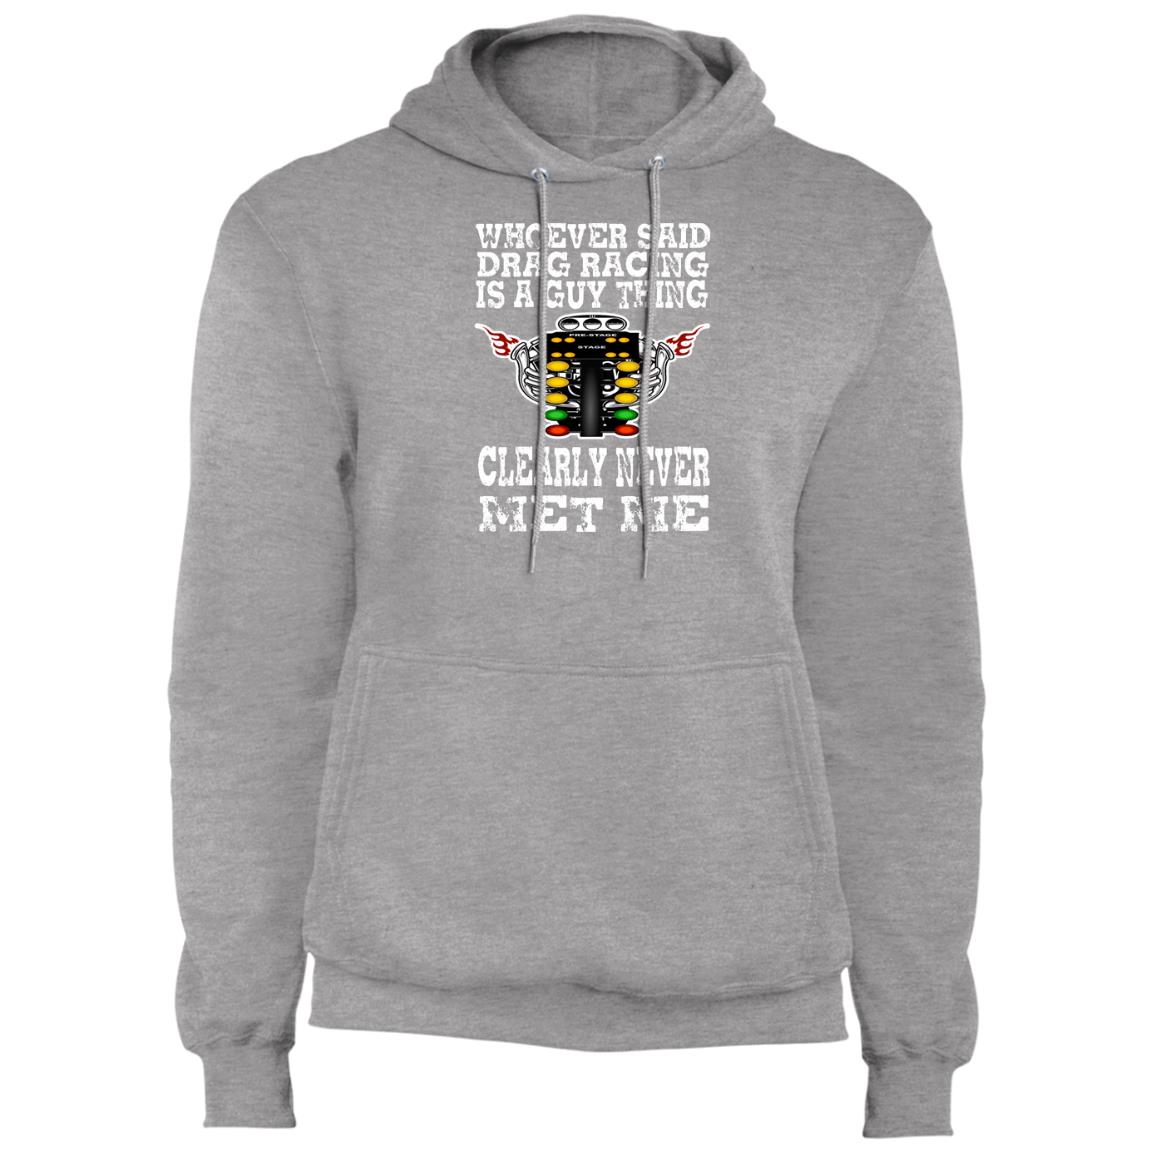 Whoever Said Drag Racing Is A Guy Thing Core Fleece Pullover Hoodie